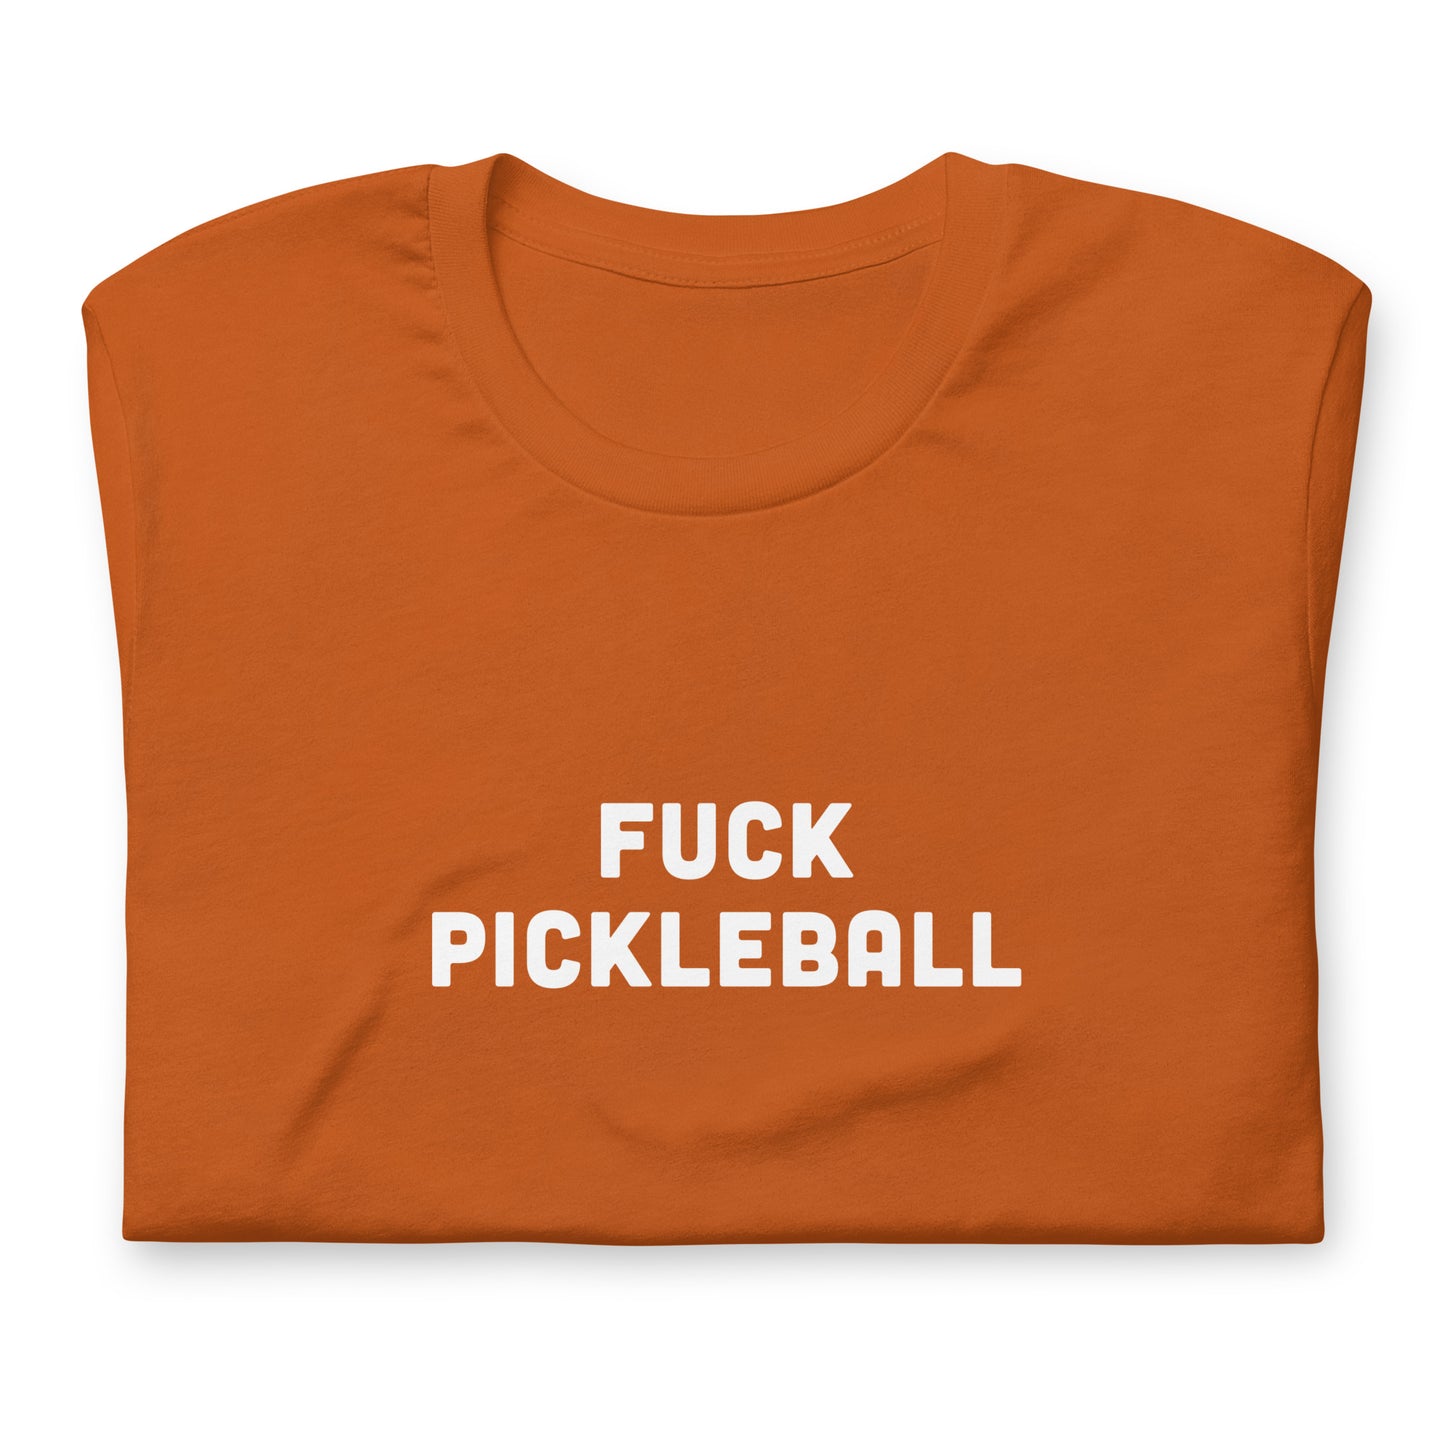 Fuck Pickleball T-Shirt Size S Color Navy